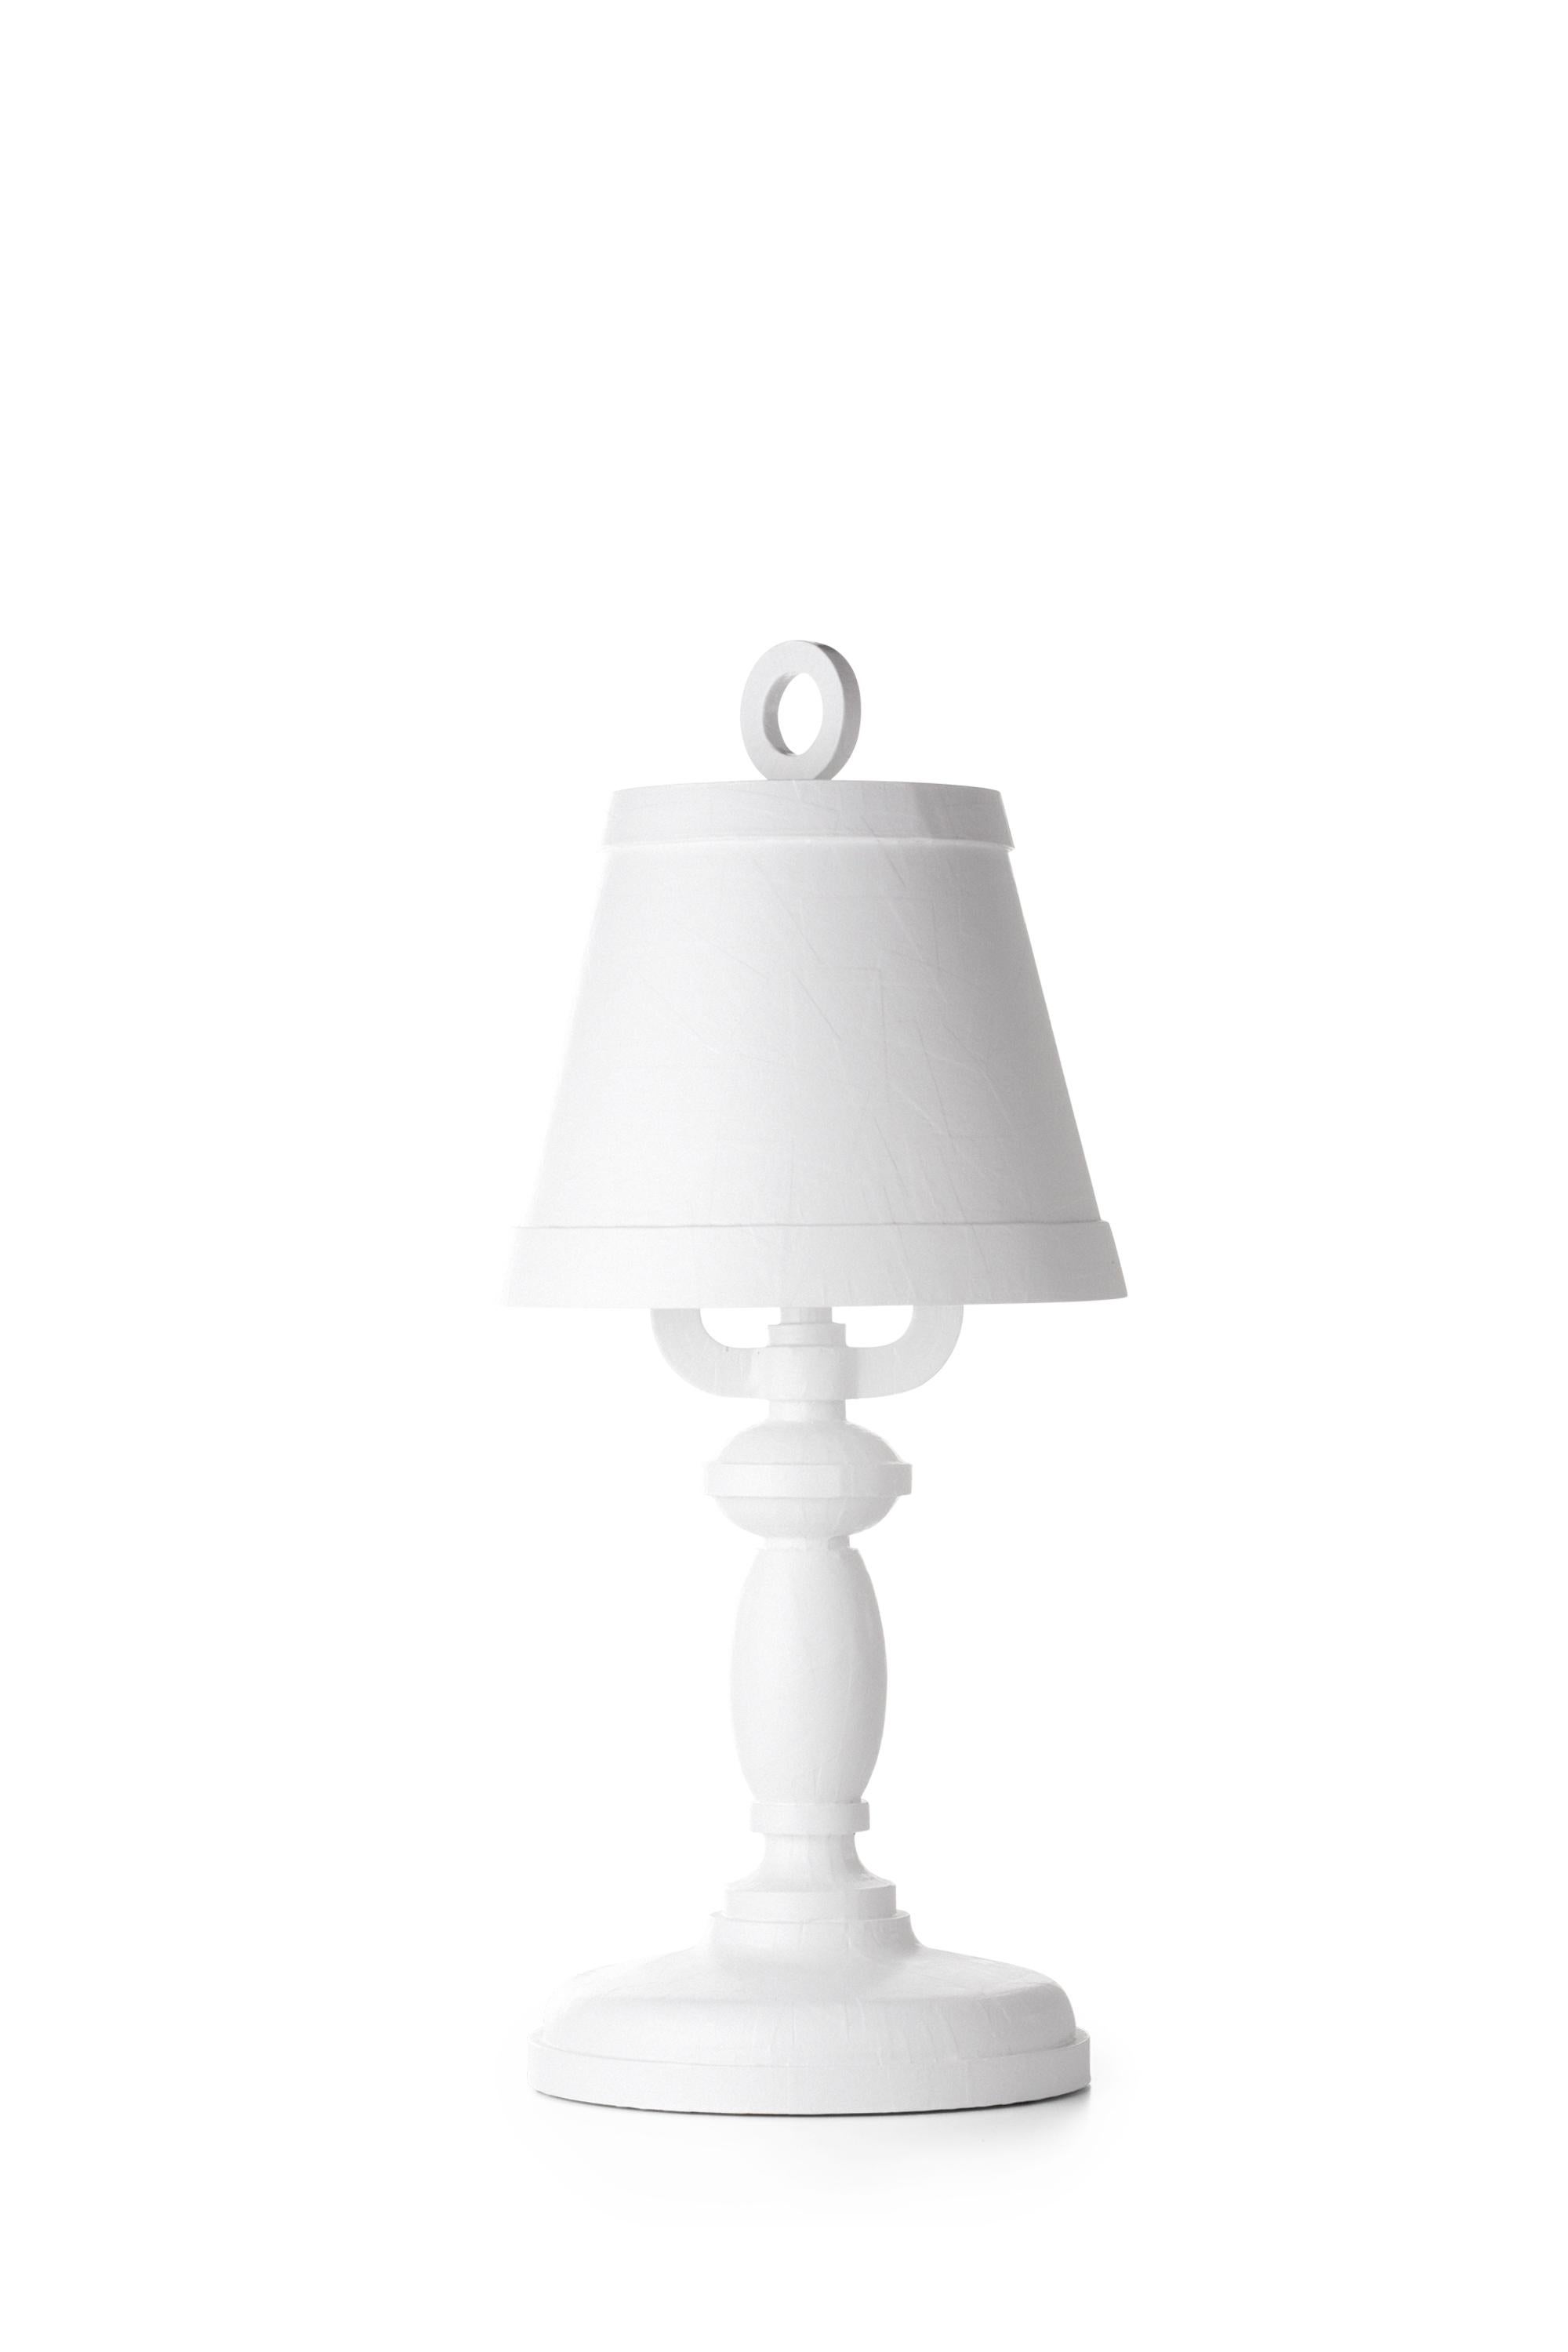 Paper Table Lamp in White Shade and White Base by Studio Job for Moooi 2